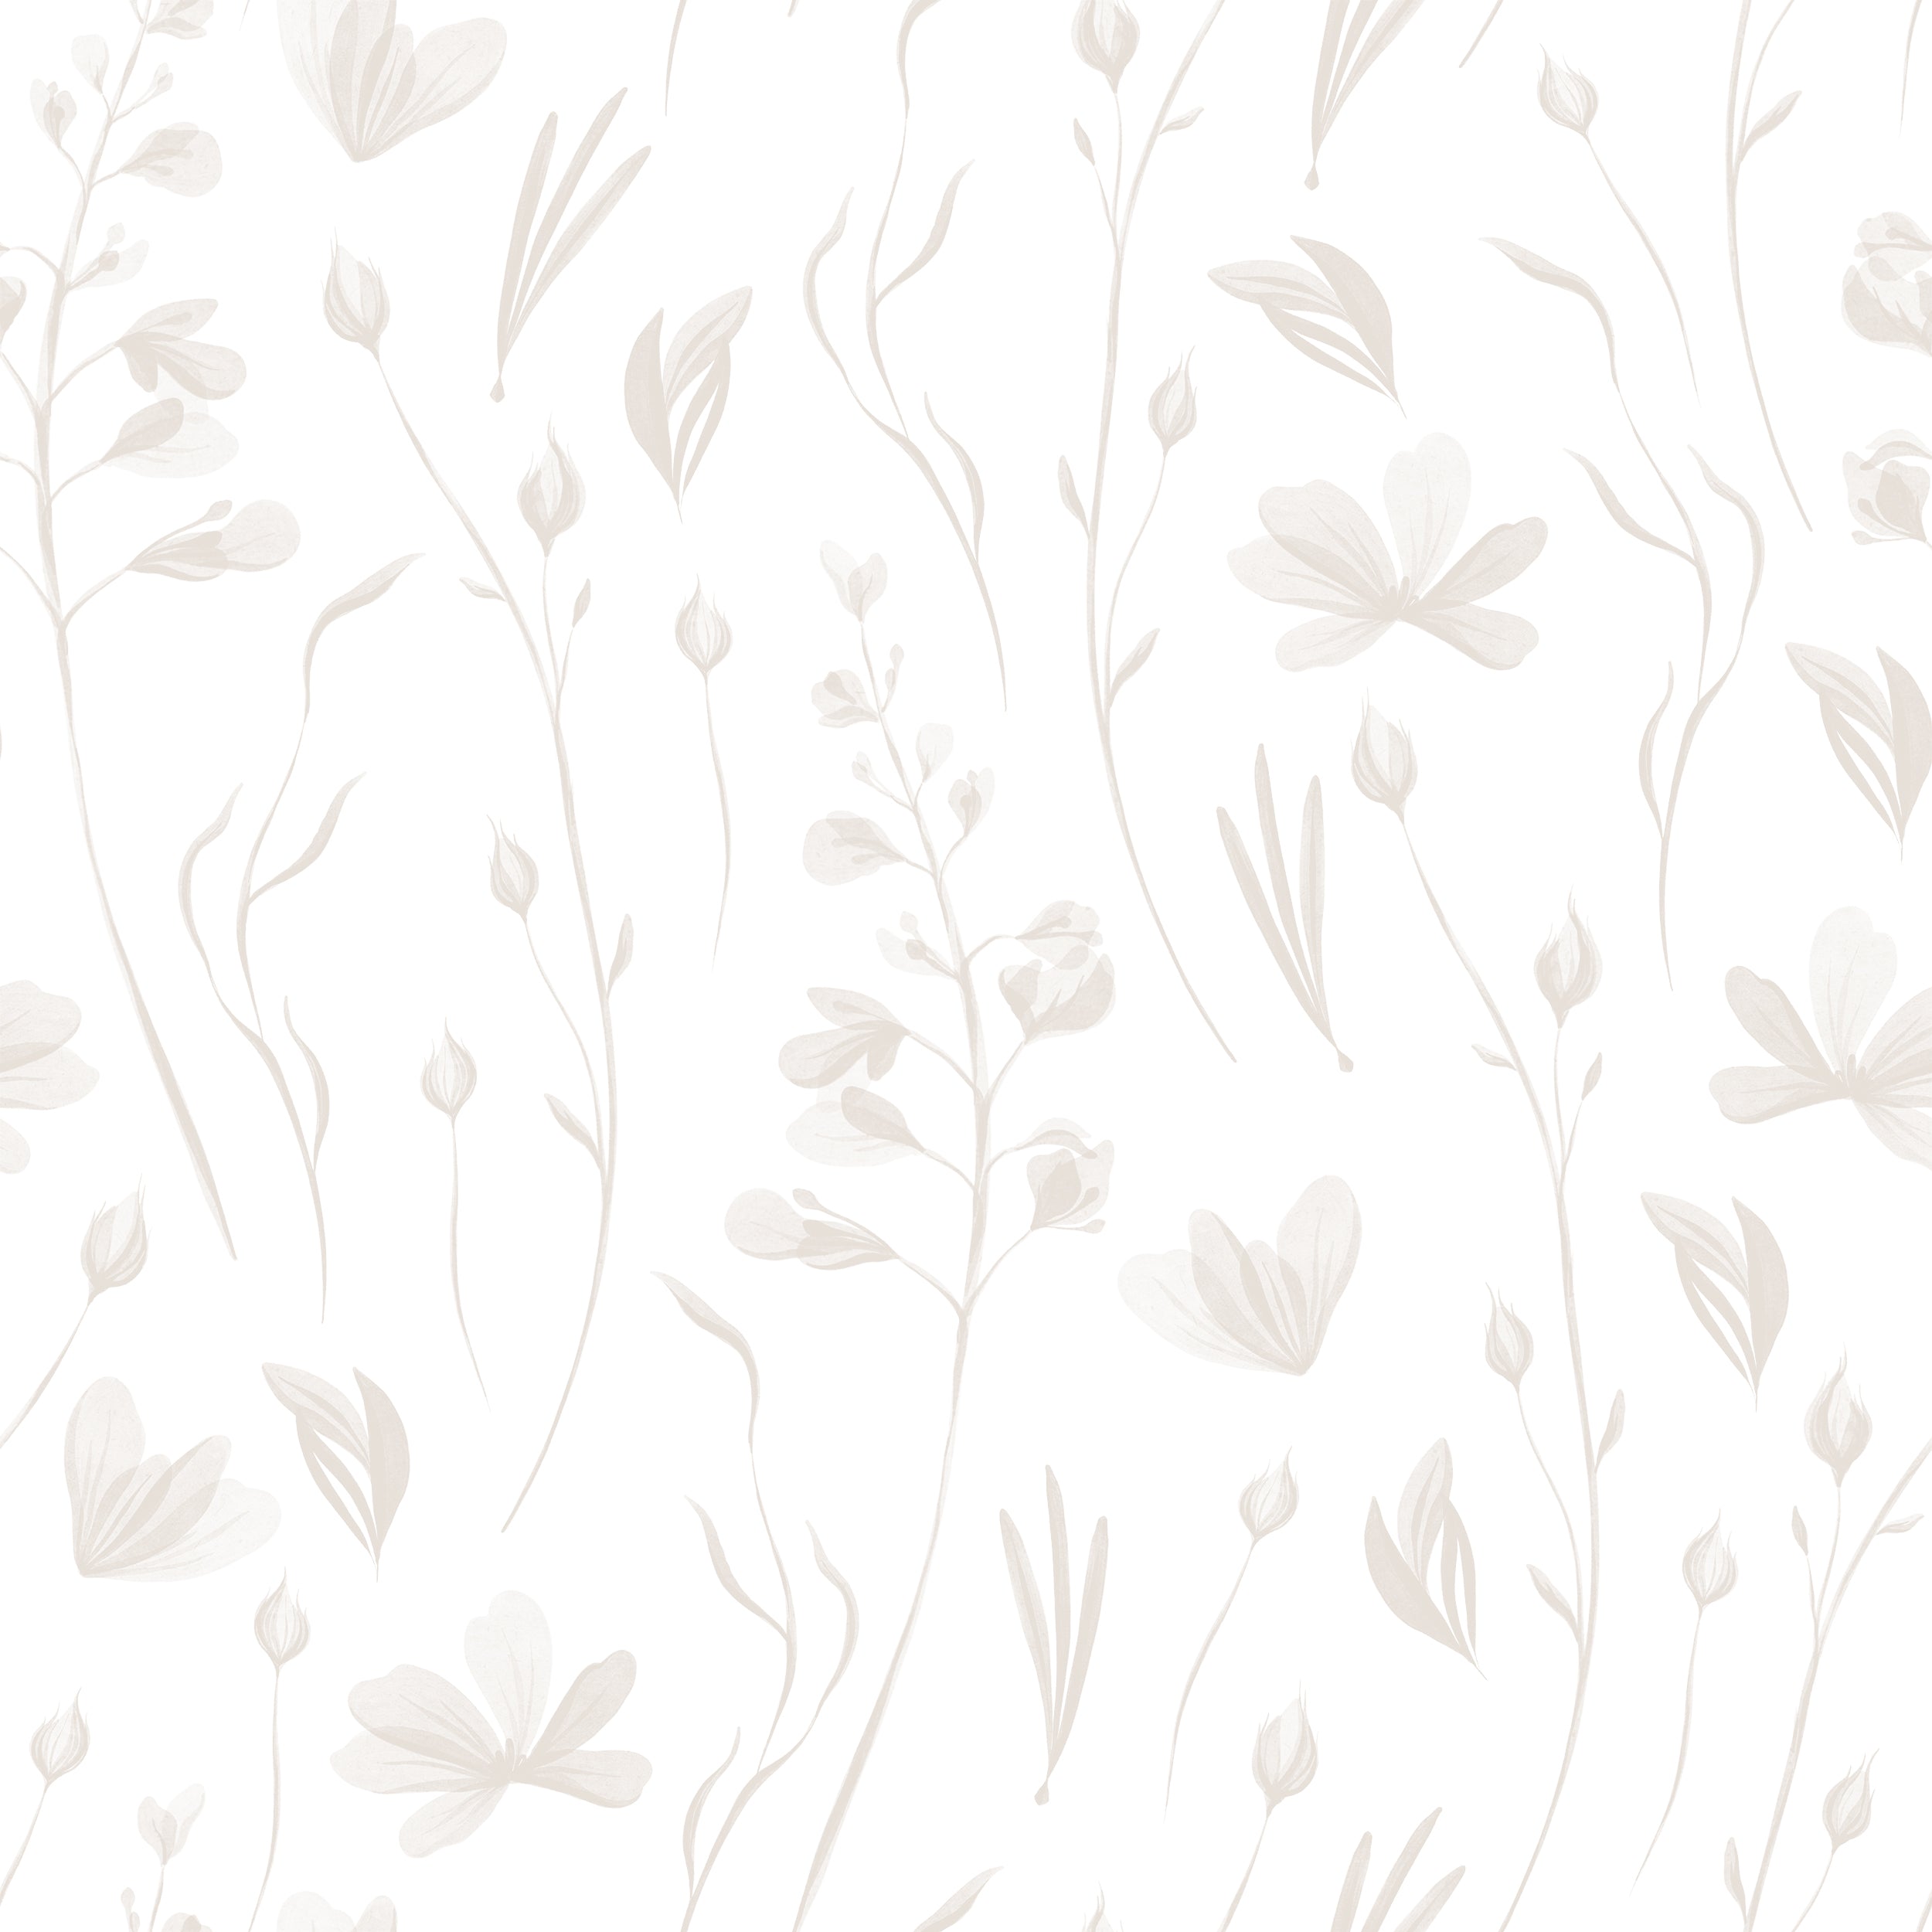 A close-up of the warm grey watercolor floral wallpaper showcasing its subtle tones and artistic watercolor effect, with a pattern of gentle flowers and leaves.